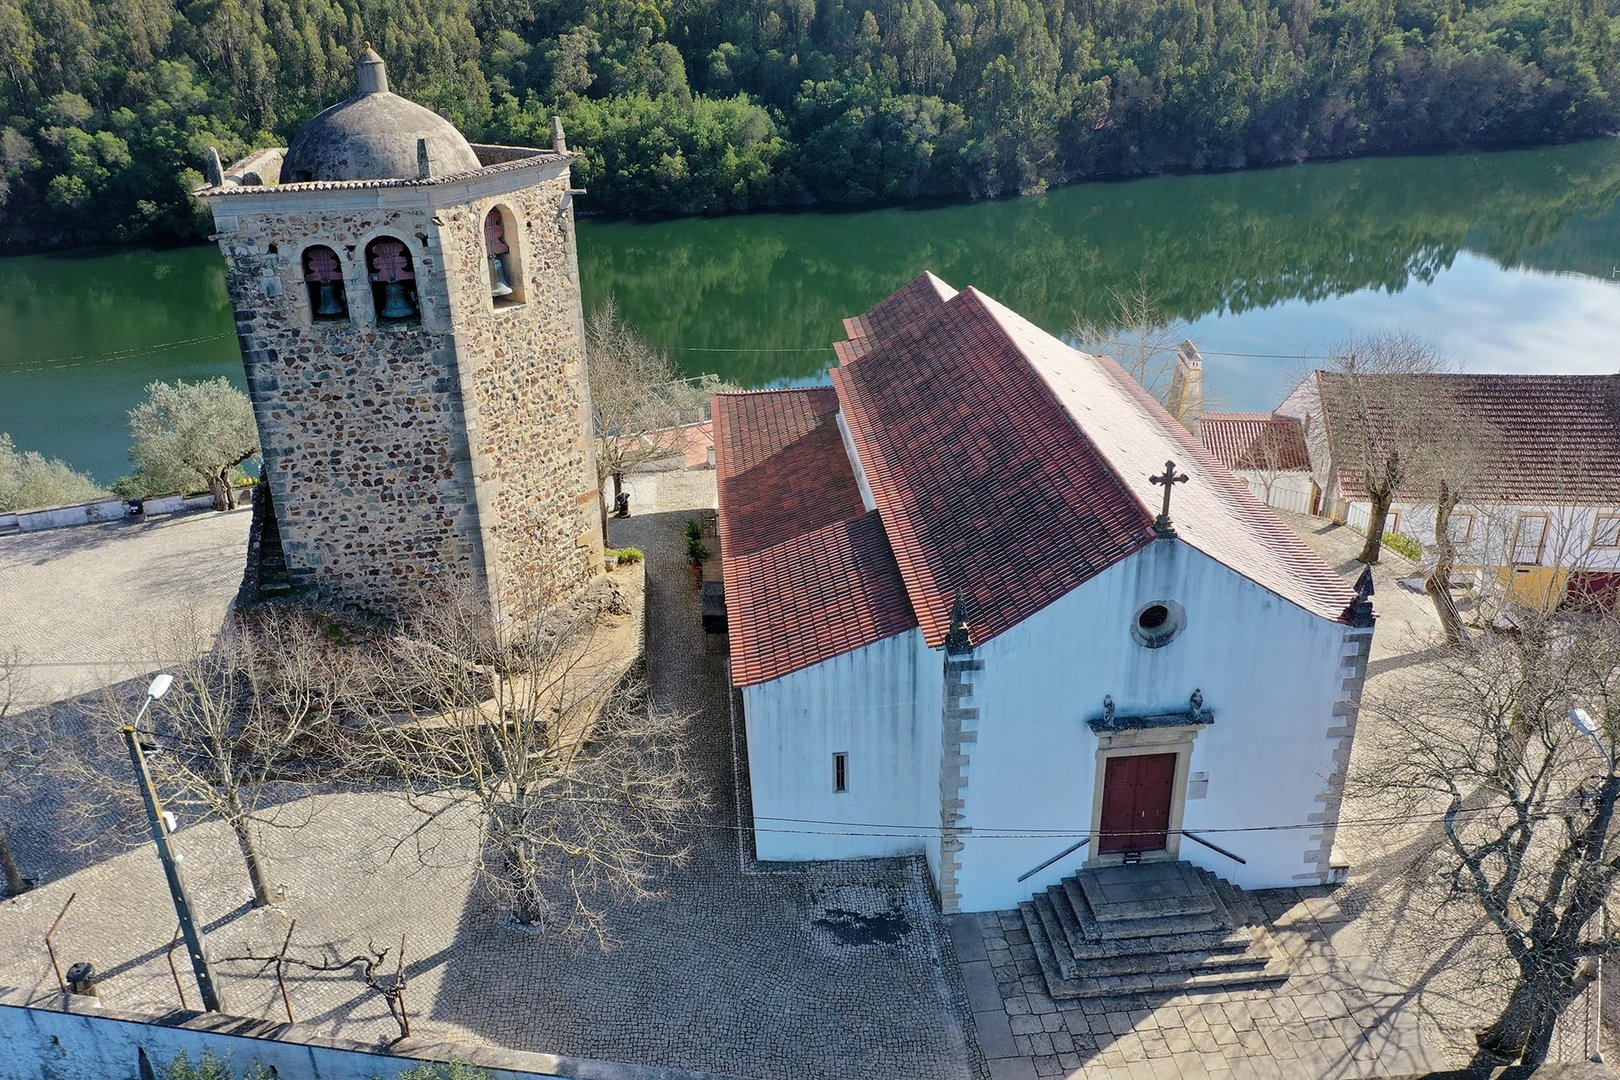 Aerial view of the Sanctuary of Our Lady of Pranto